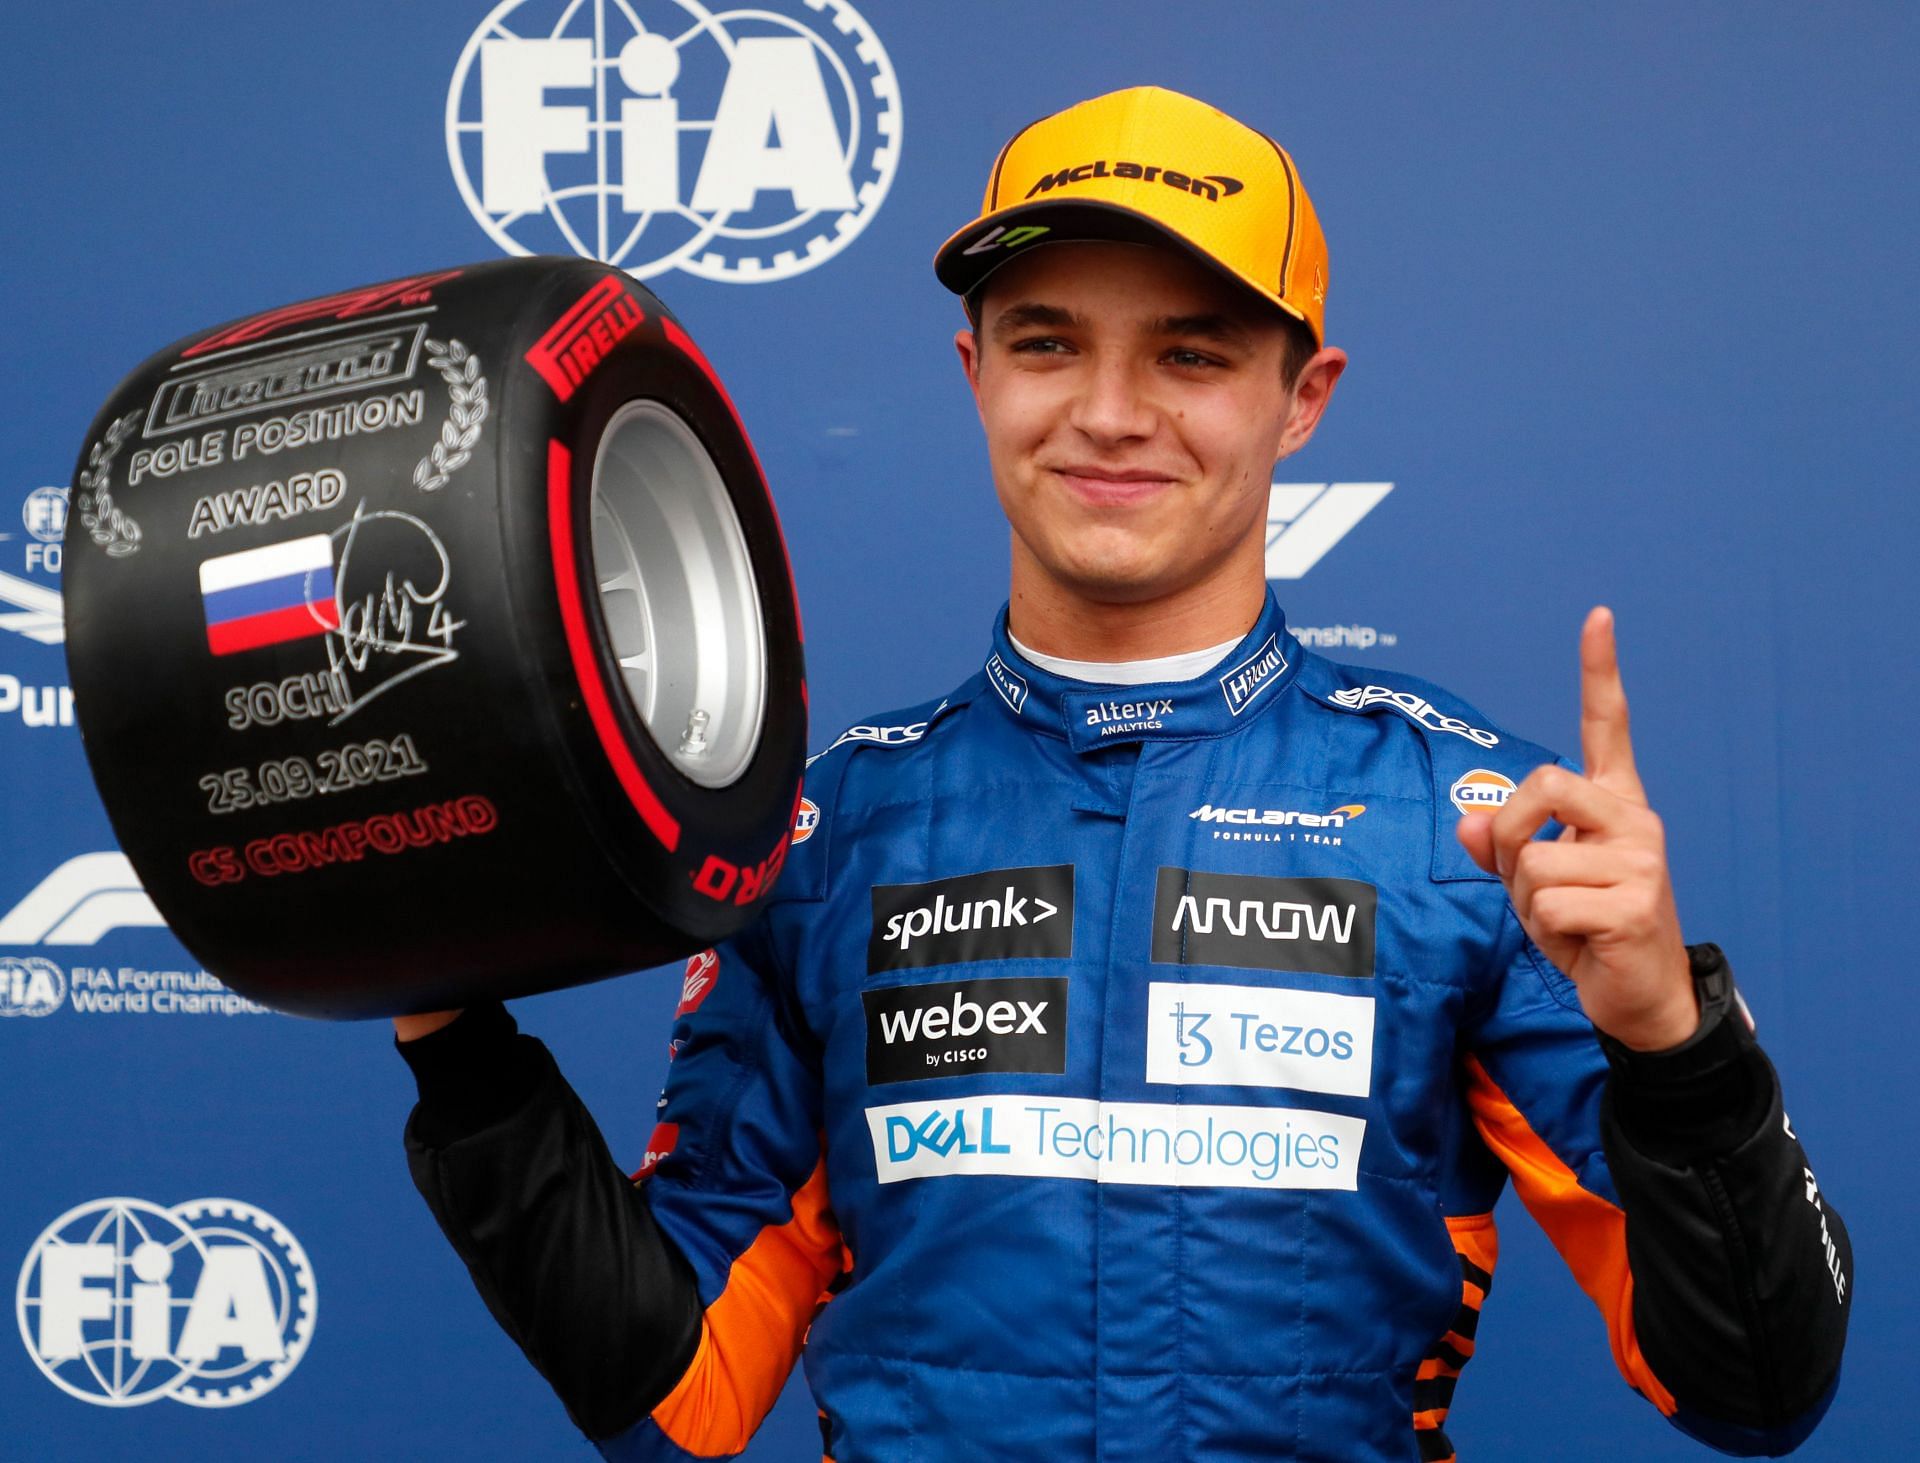 Lando&#039;s pole position in Russia was a validation of a stupendous F1 season that the young driver had put together